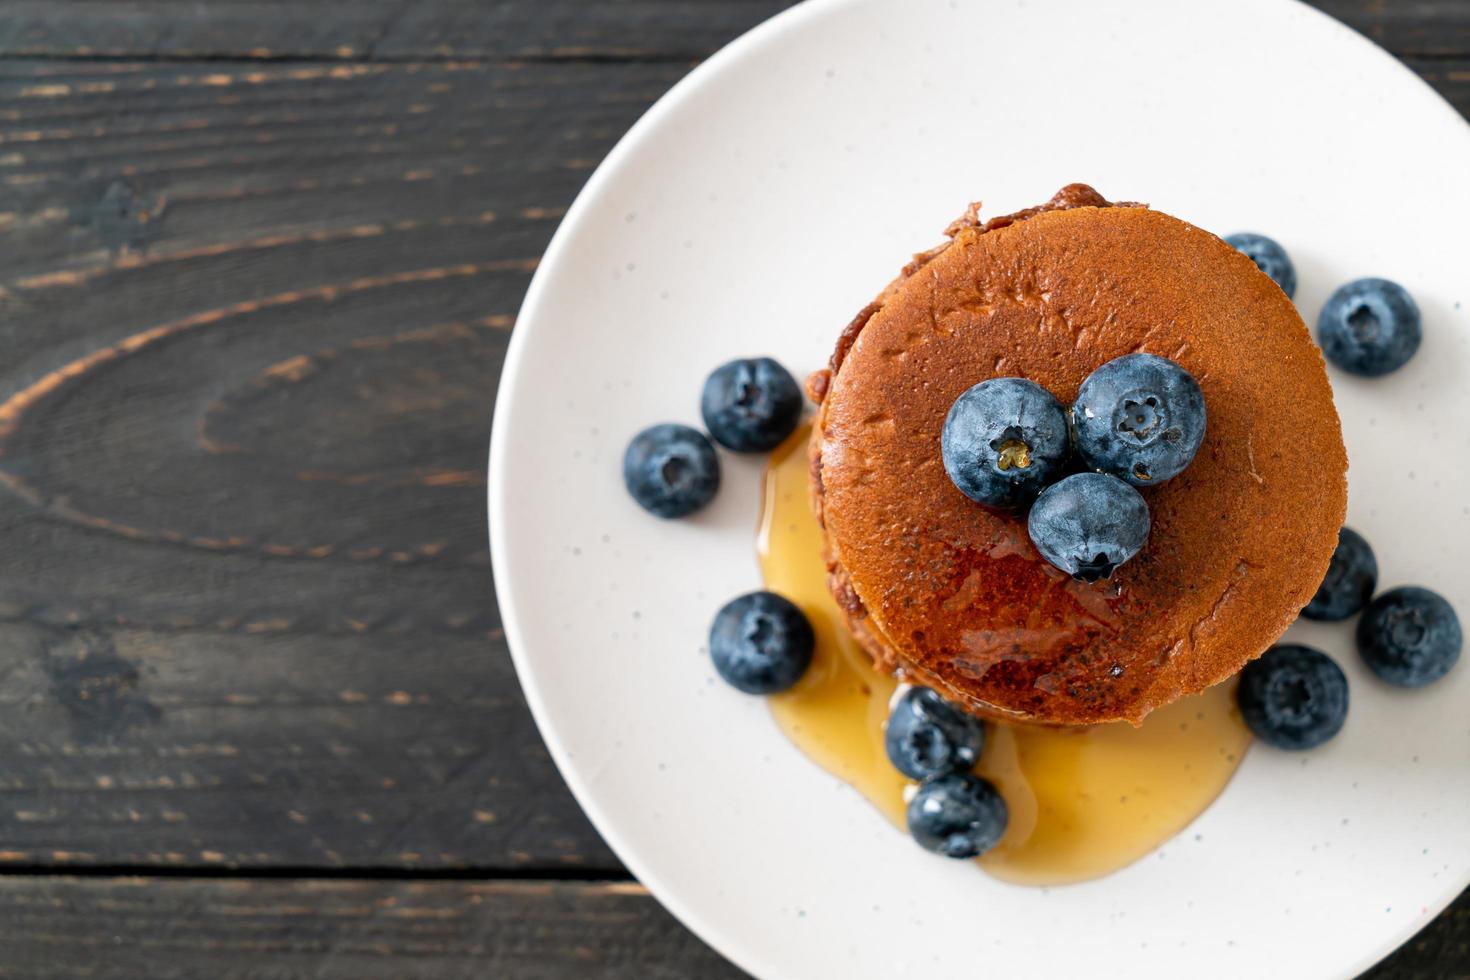 Chocolate pancake stack with blueberry and honey on a plate photo